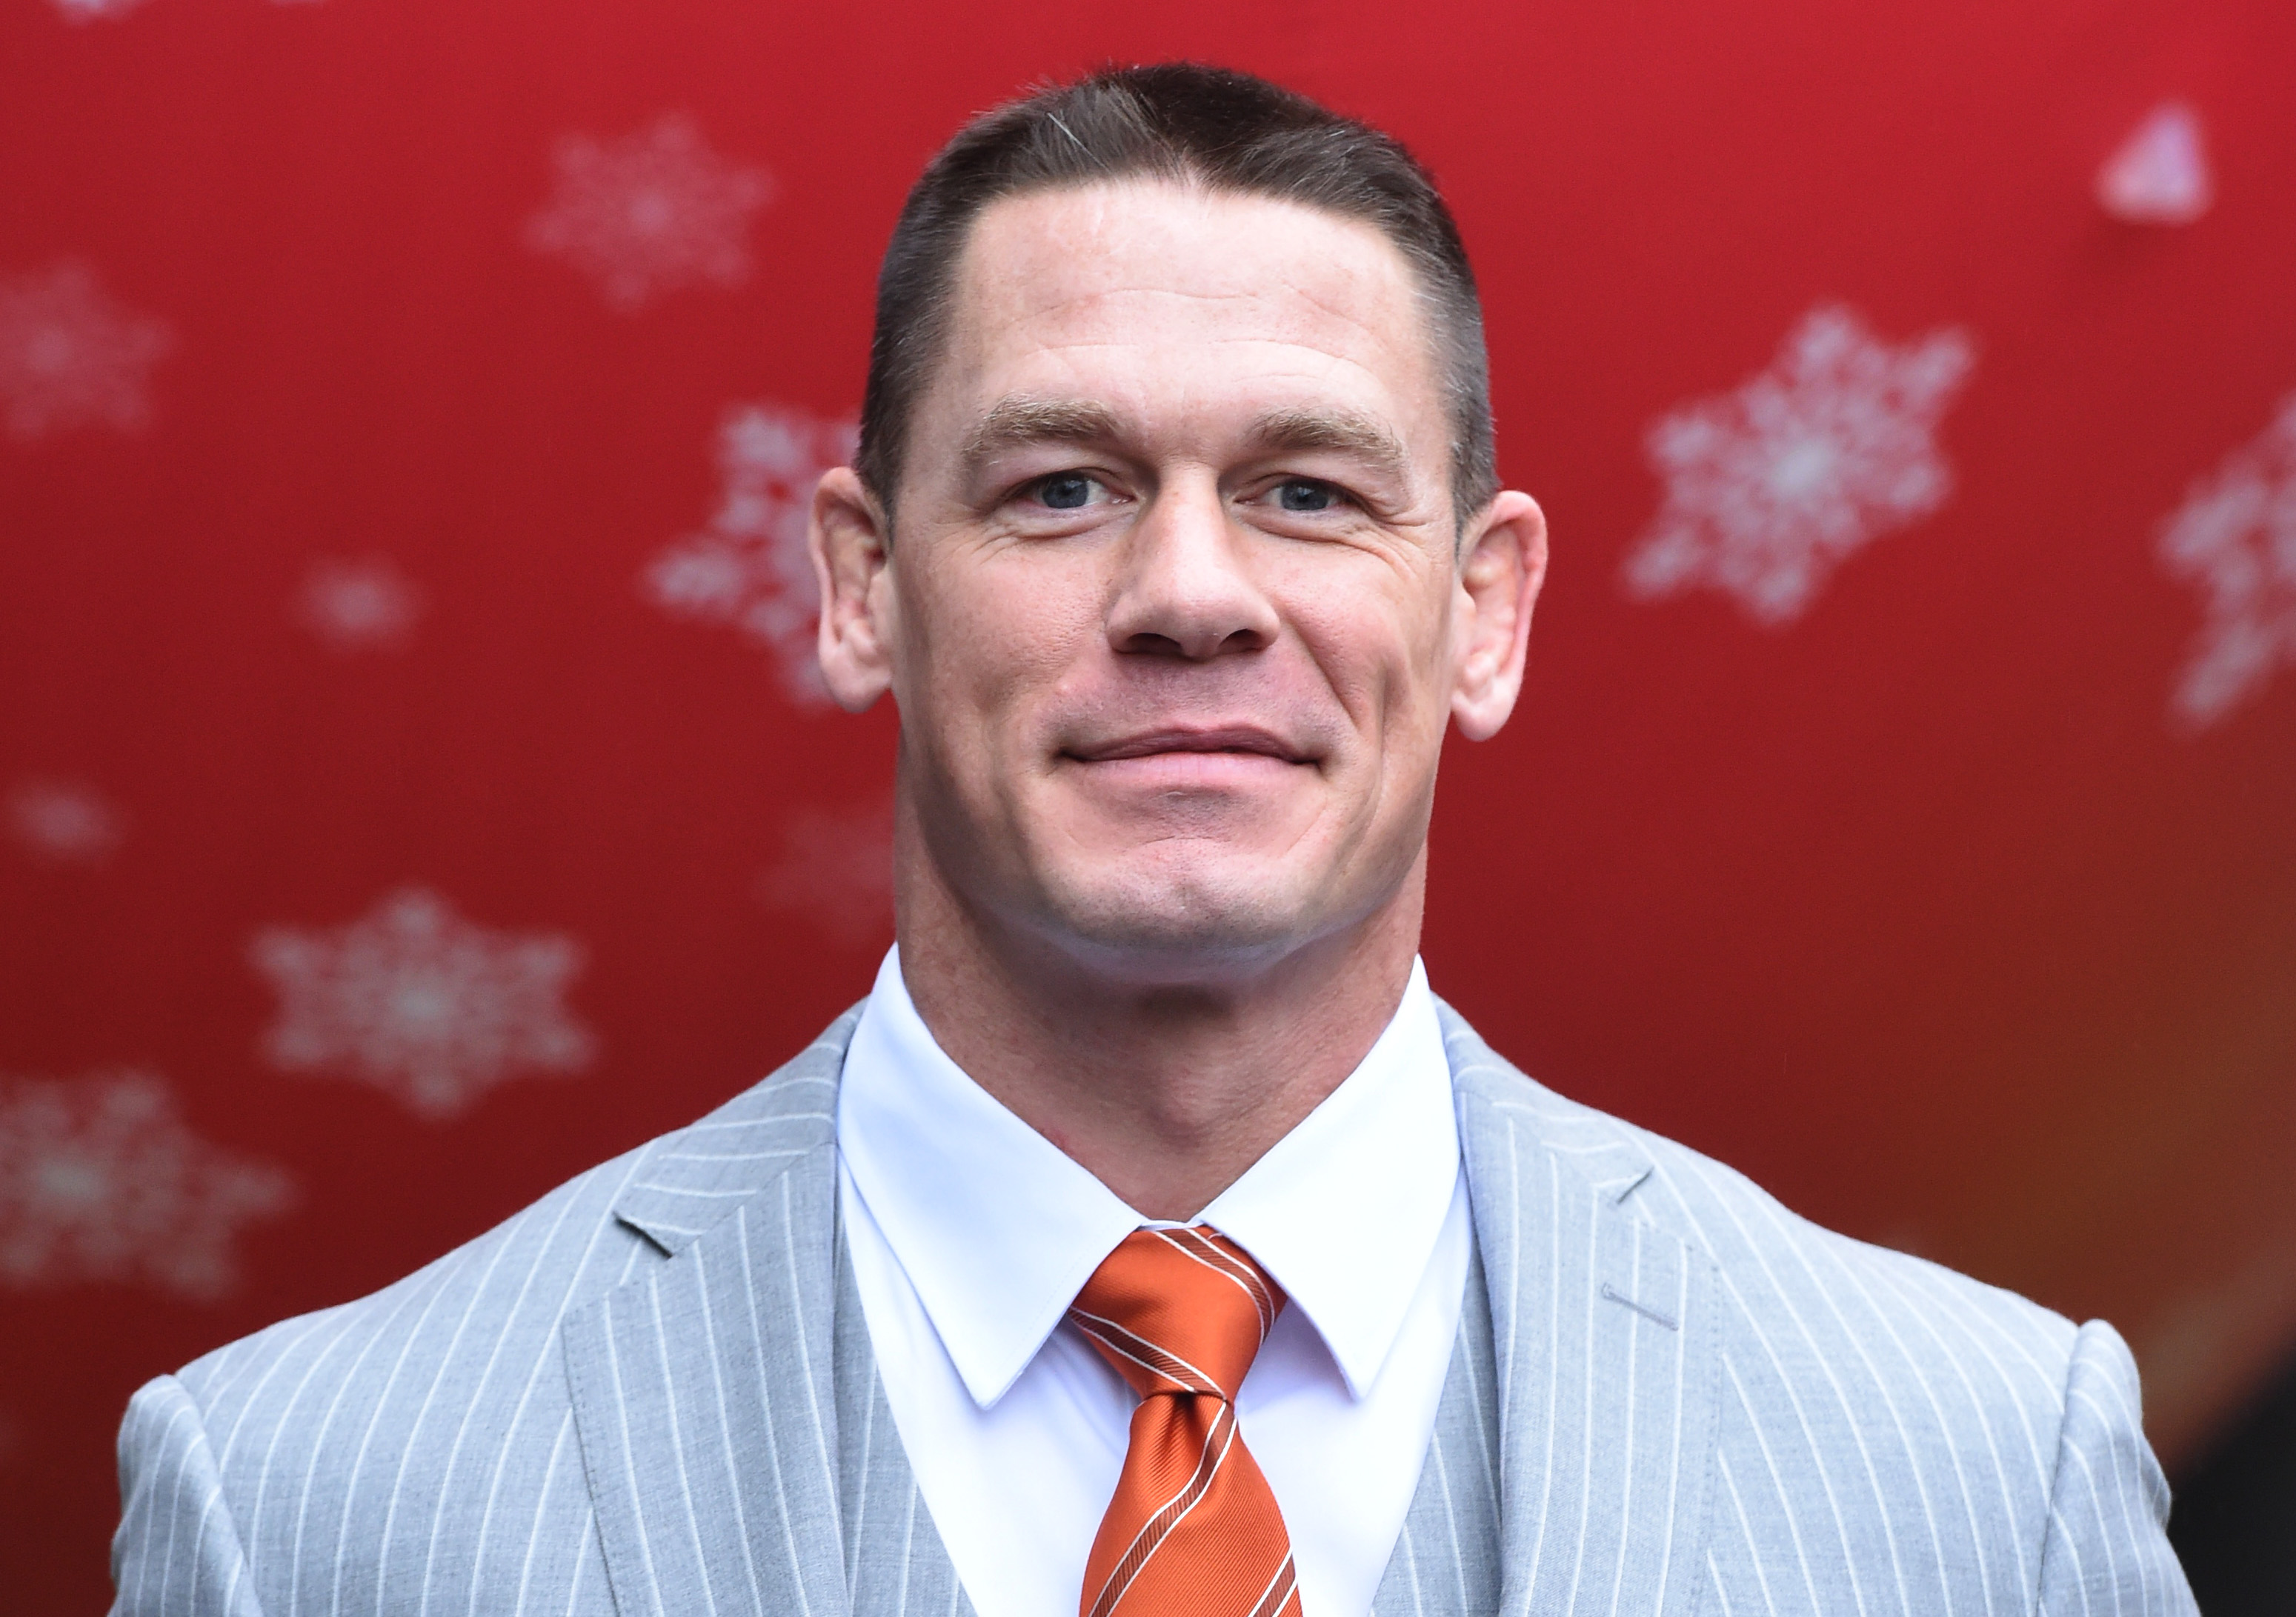 John Cena attends the 'Ferdinand' special screening at BFI Southbank on December 3, 2017, in London, England. | Source: Getty Images